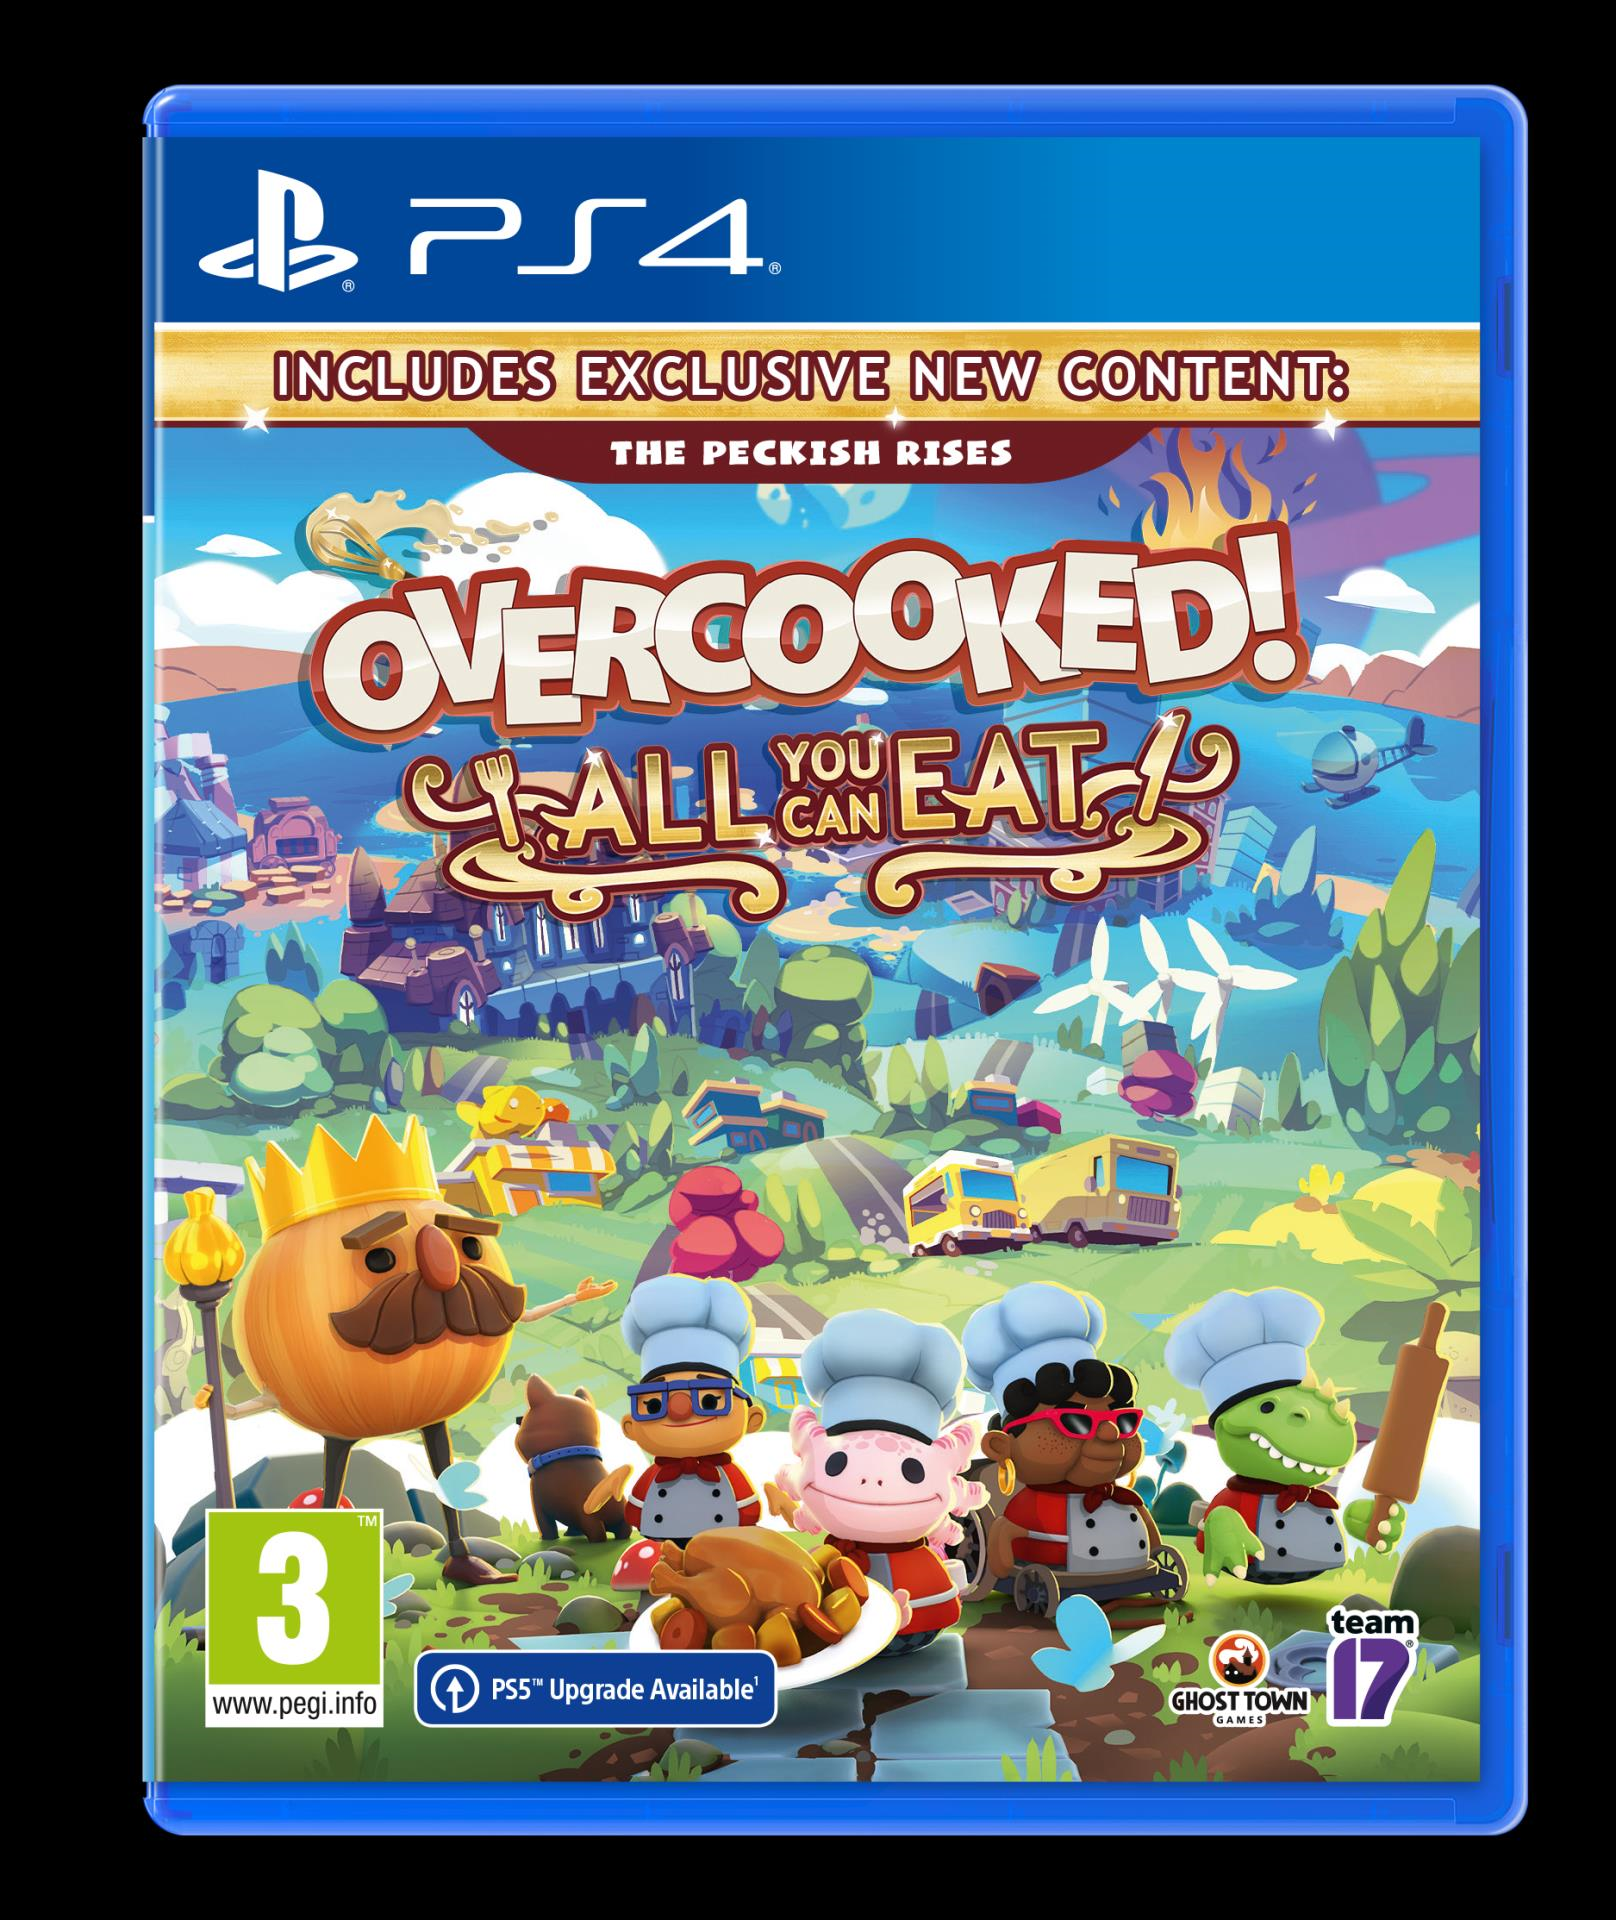 Overcooked - All You Can Eat Edition